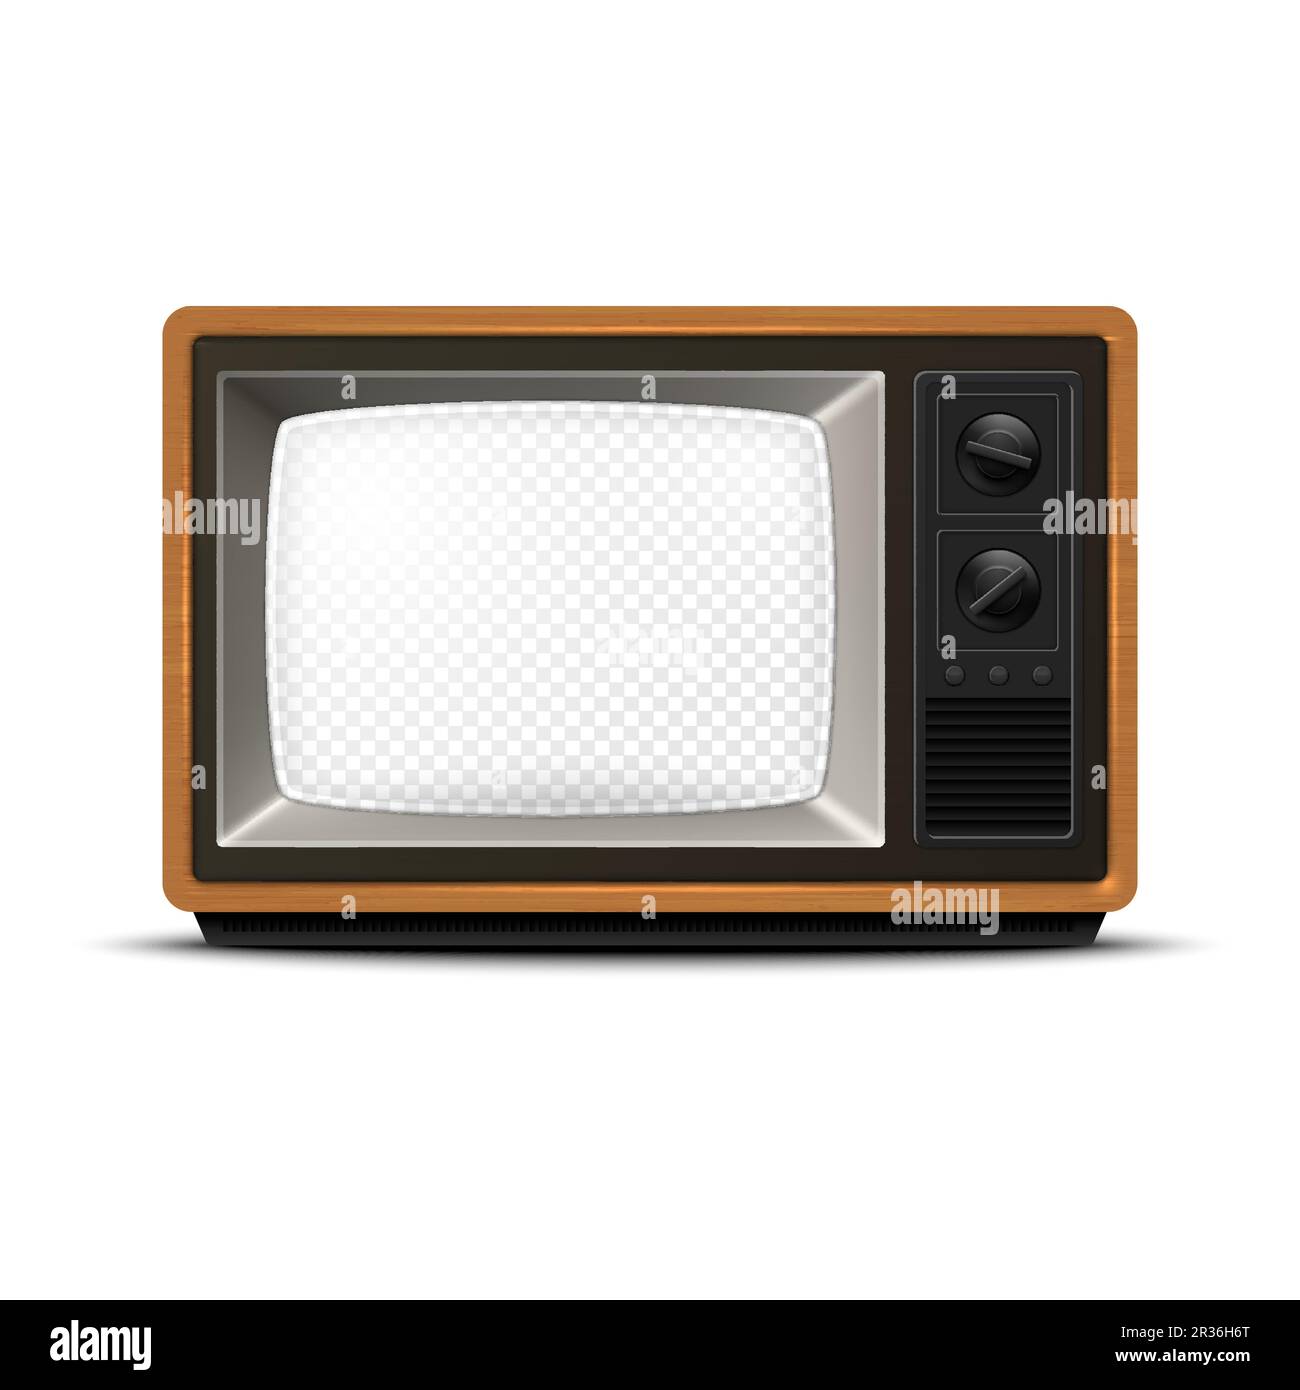 Vector Retro TV Receiver with Wooden Frame and Transparent Screen, Isolated. Home Interior Design Concept. TV Frame Design Template, Border Stock Vector